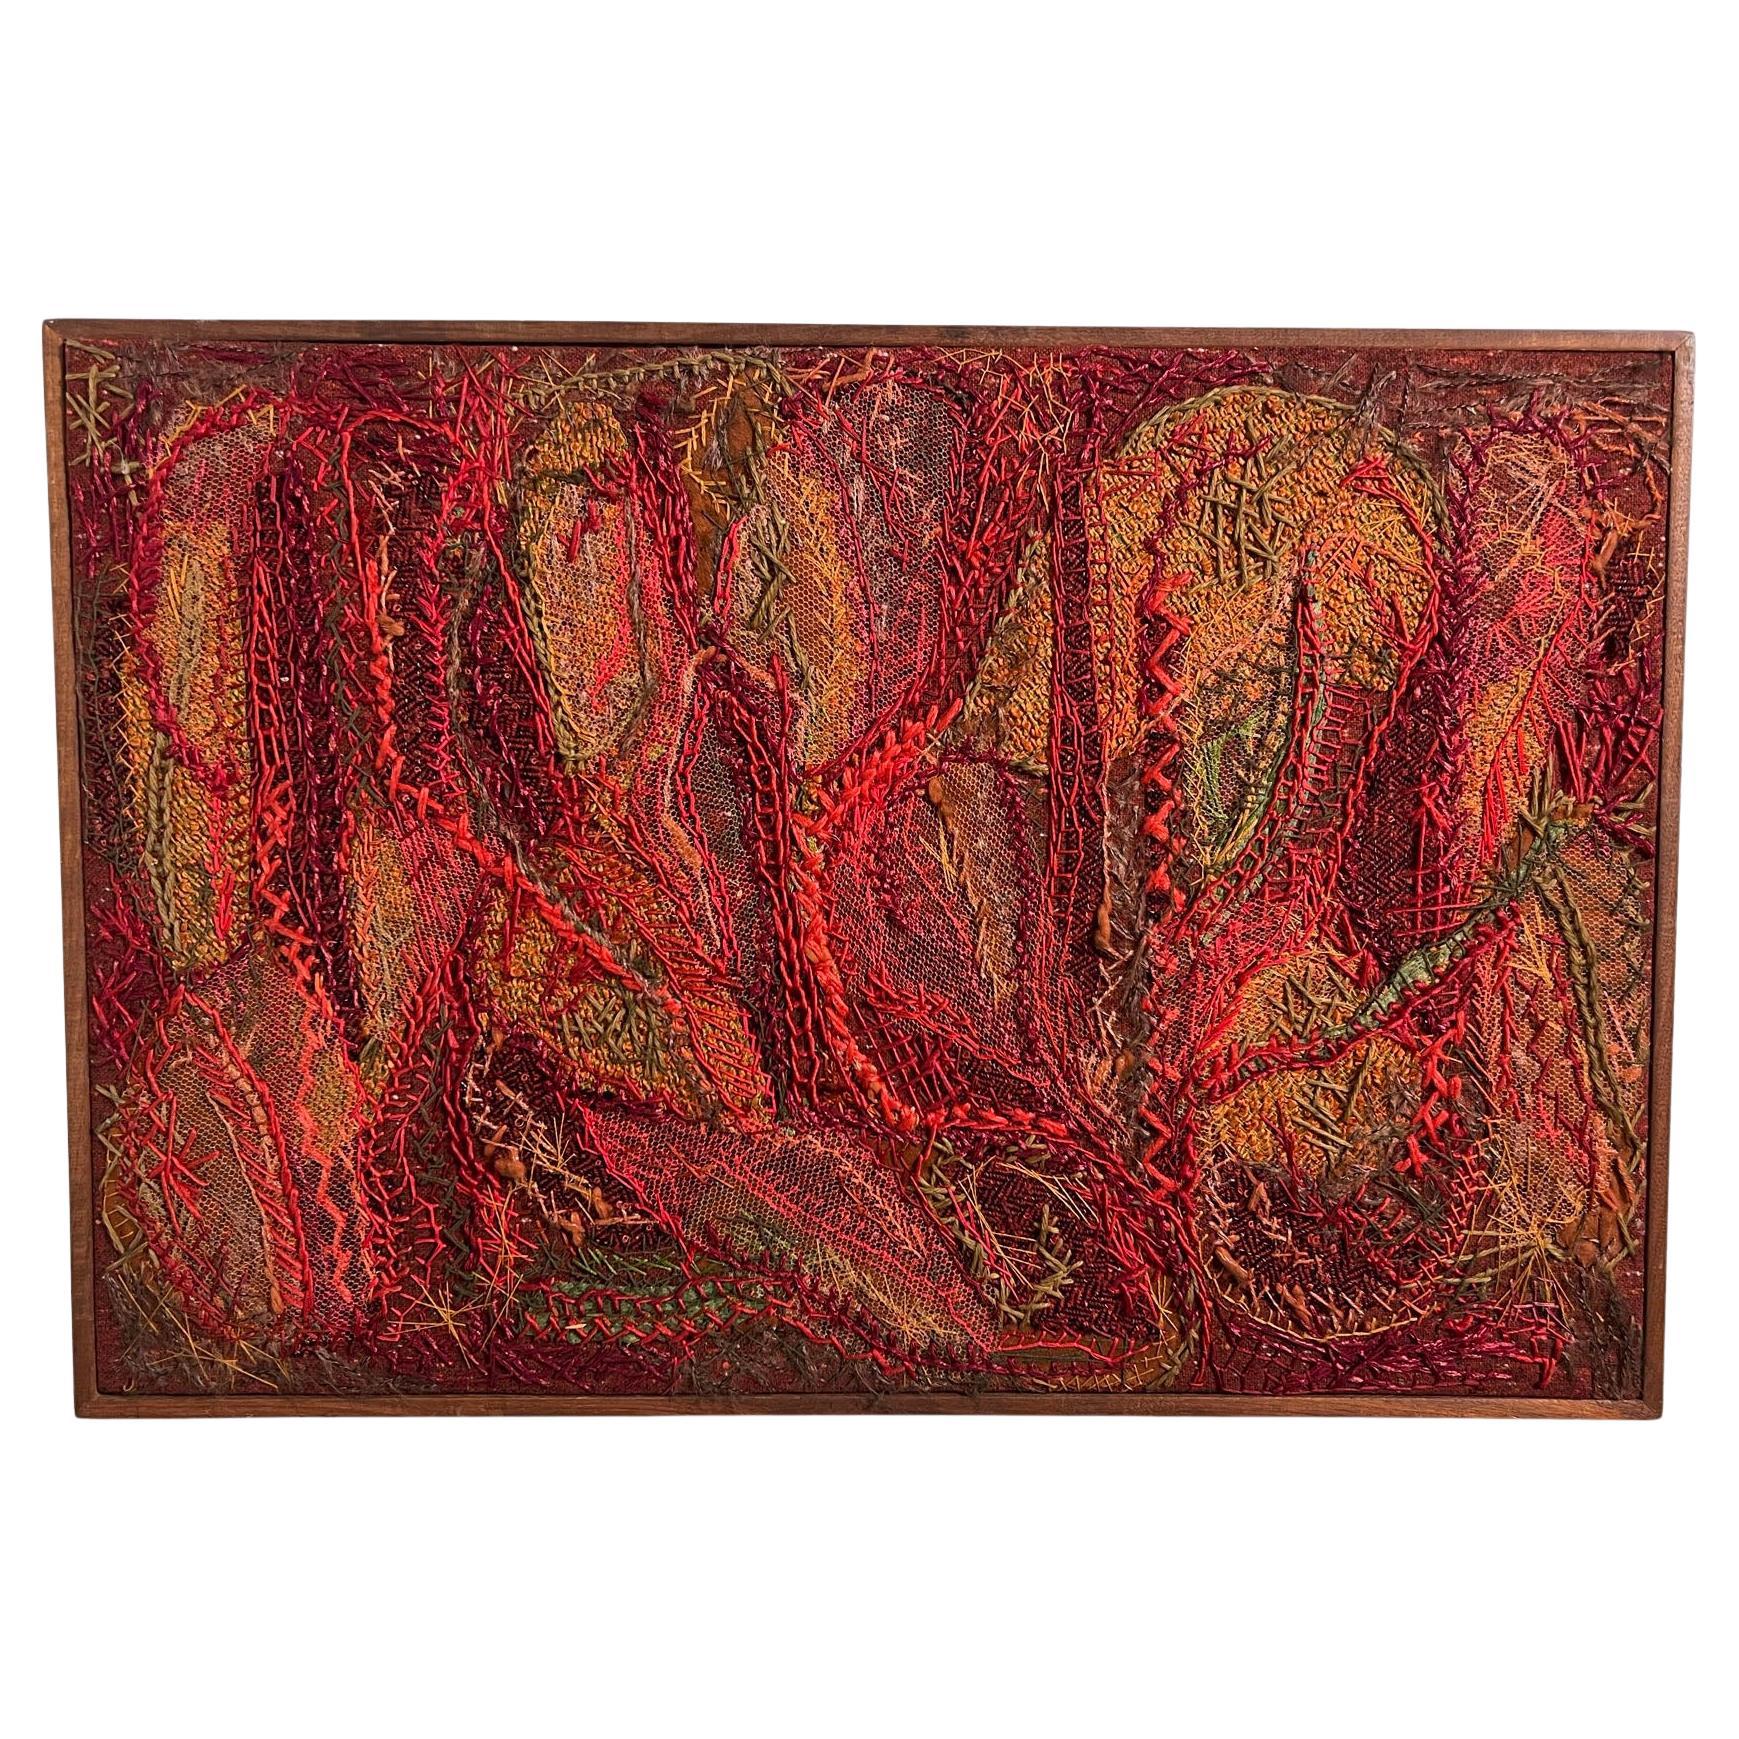 Abstract 1960s Textile Fiber Art Panel Titled "Summer is Gone" by Helen Richards For Sale